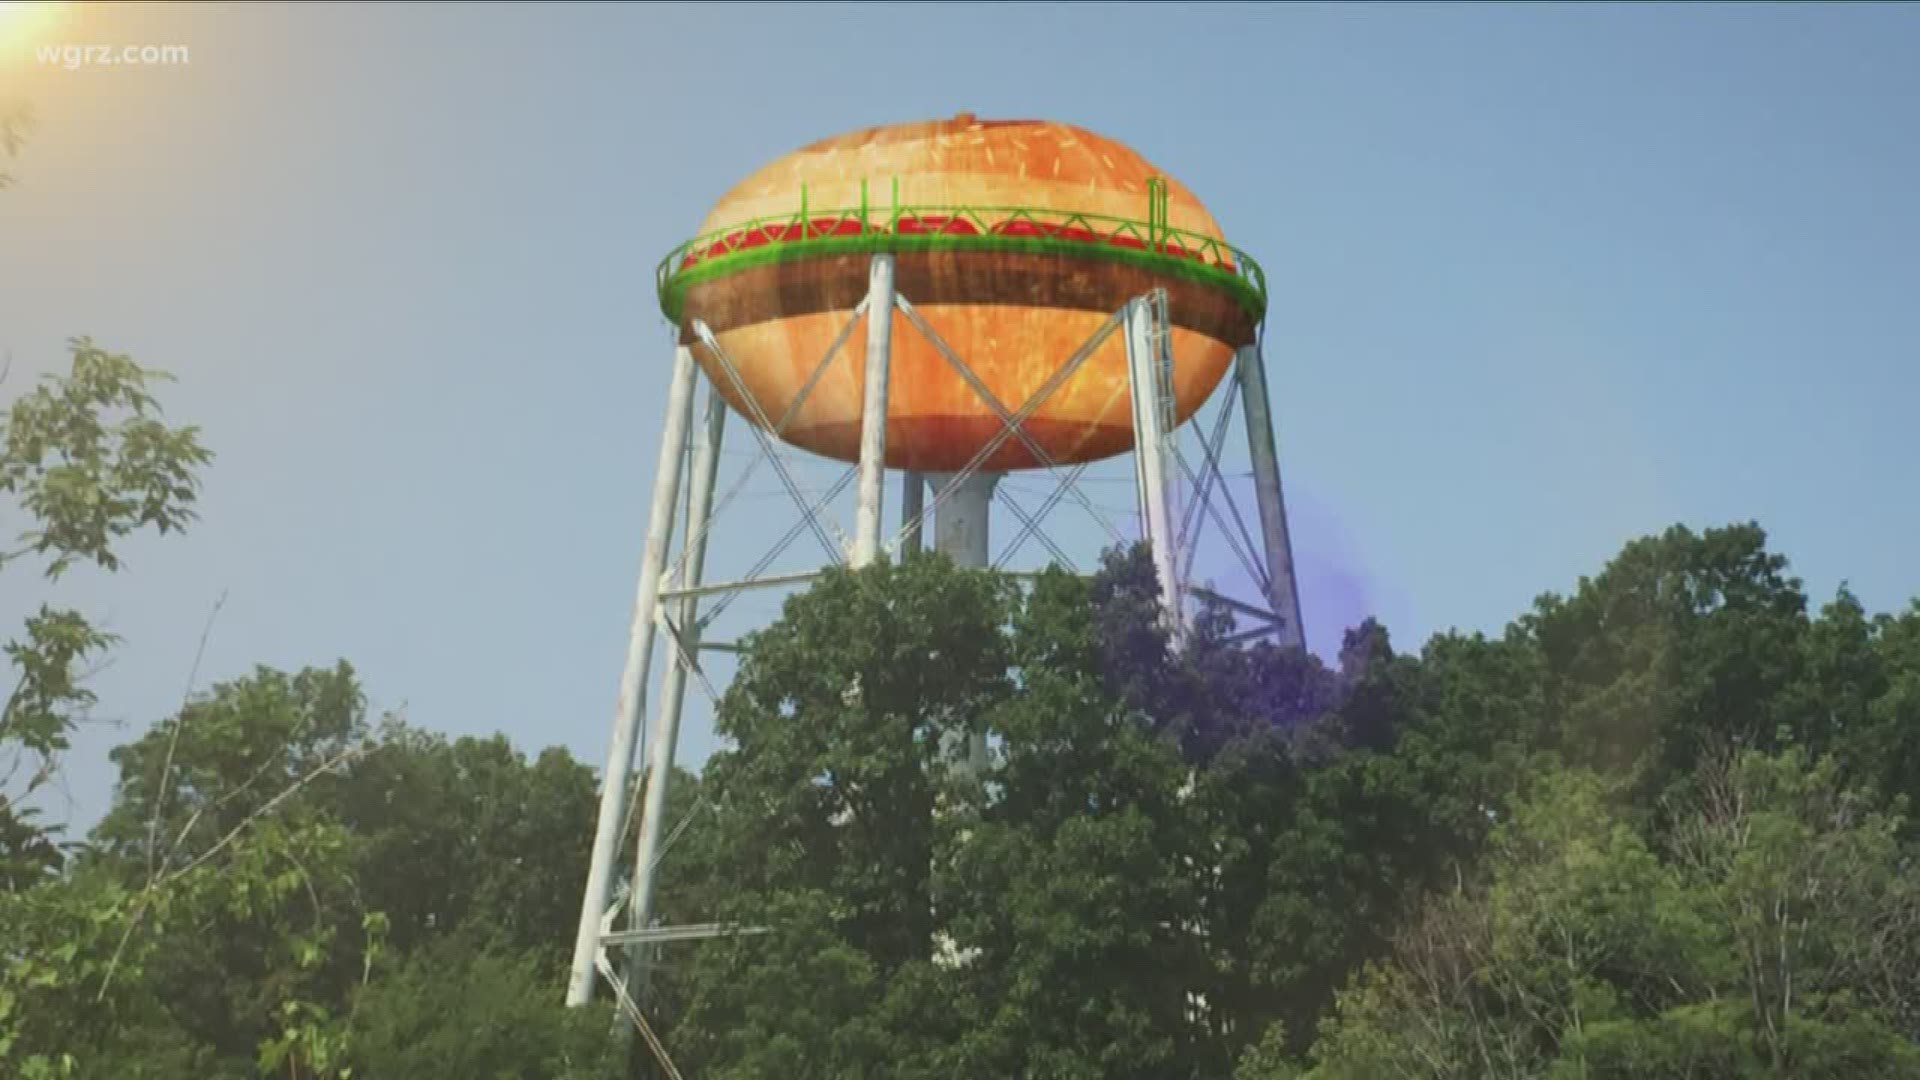 The town of Hamburg is raising money to paint their water tower to look like a hamburger.